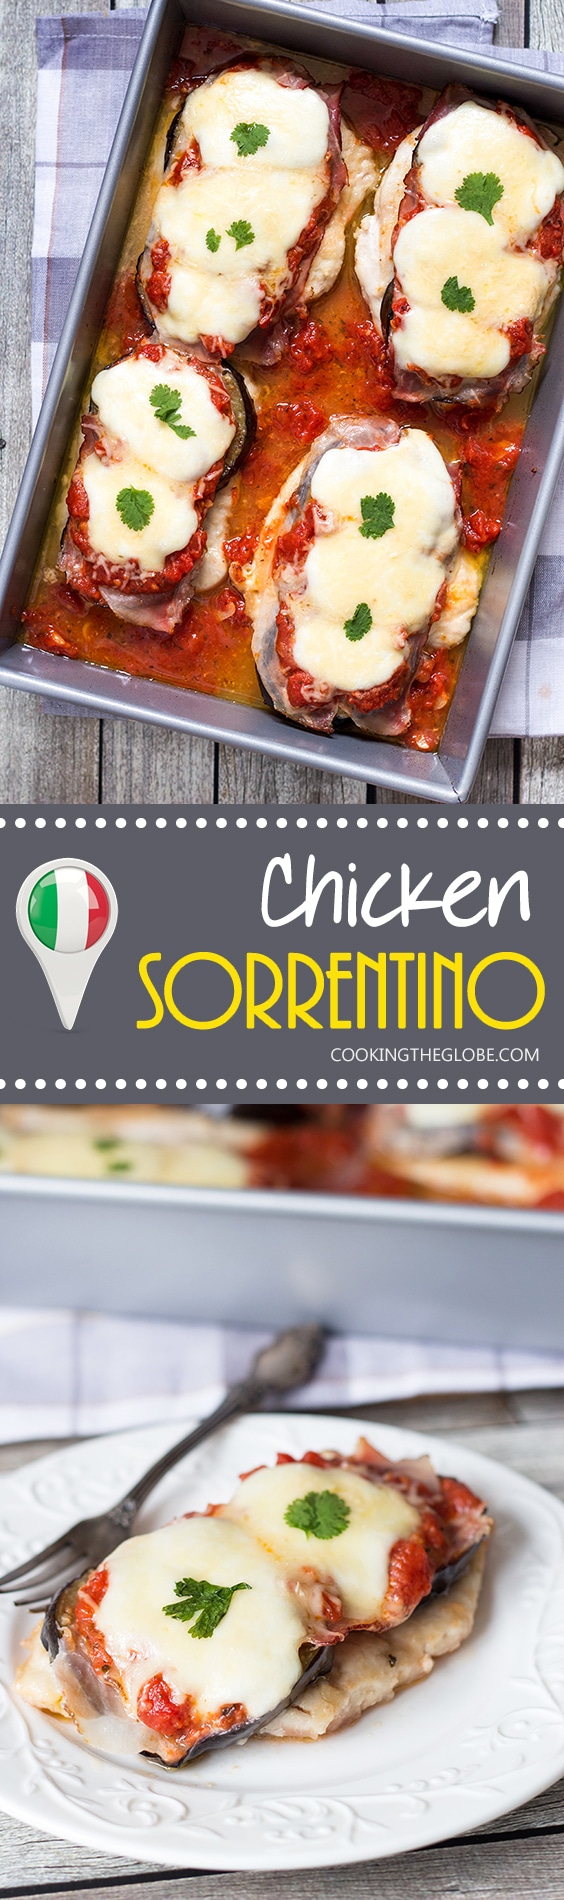 This Chicken Sorrentino includes eggplant, prosciutto, mozzarella, Parmesan cheese and marinara sauce. How is that for a combination?